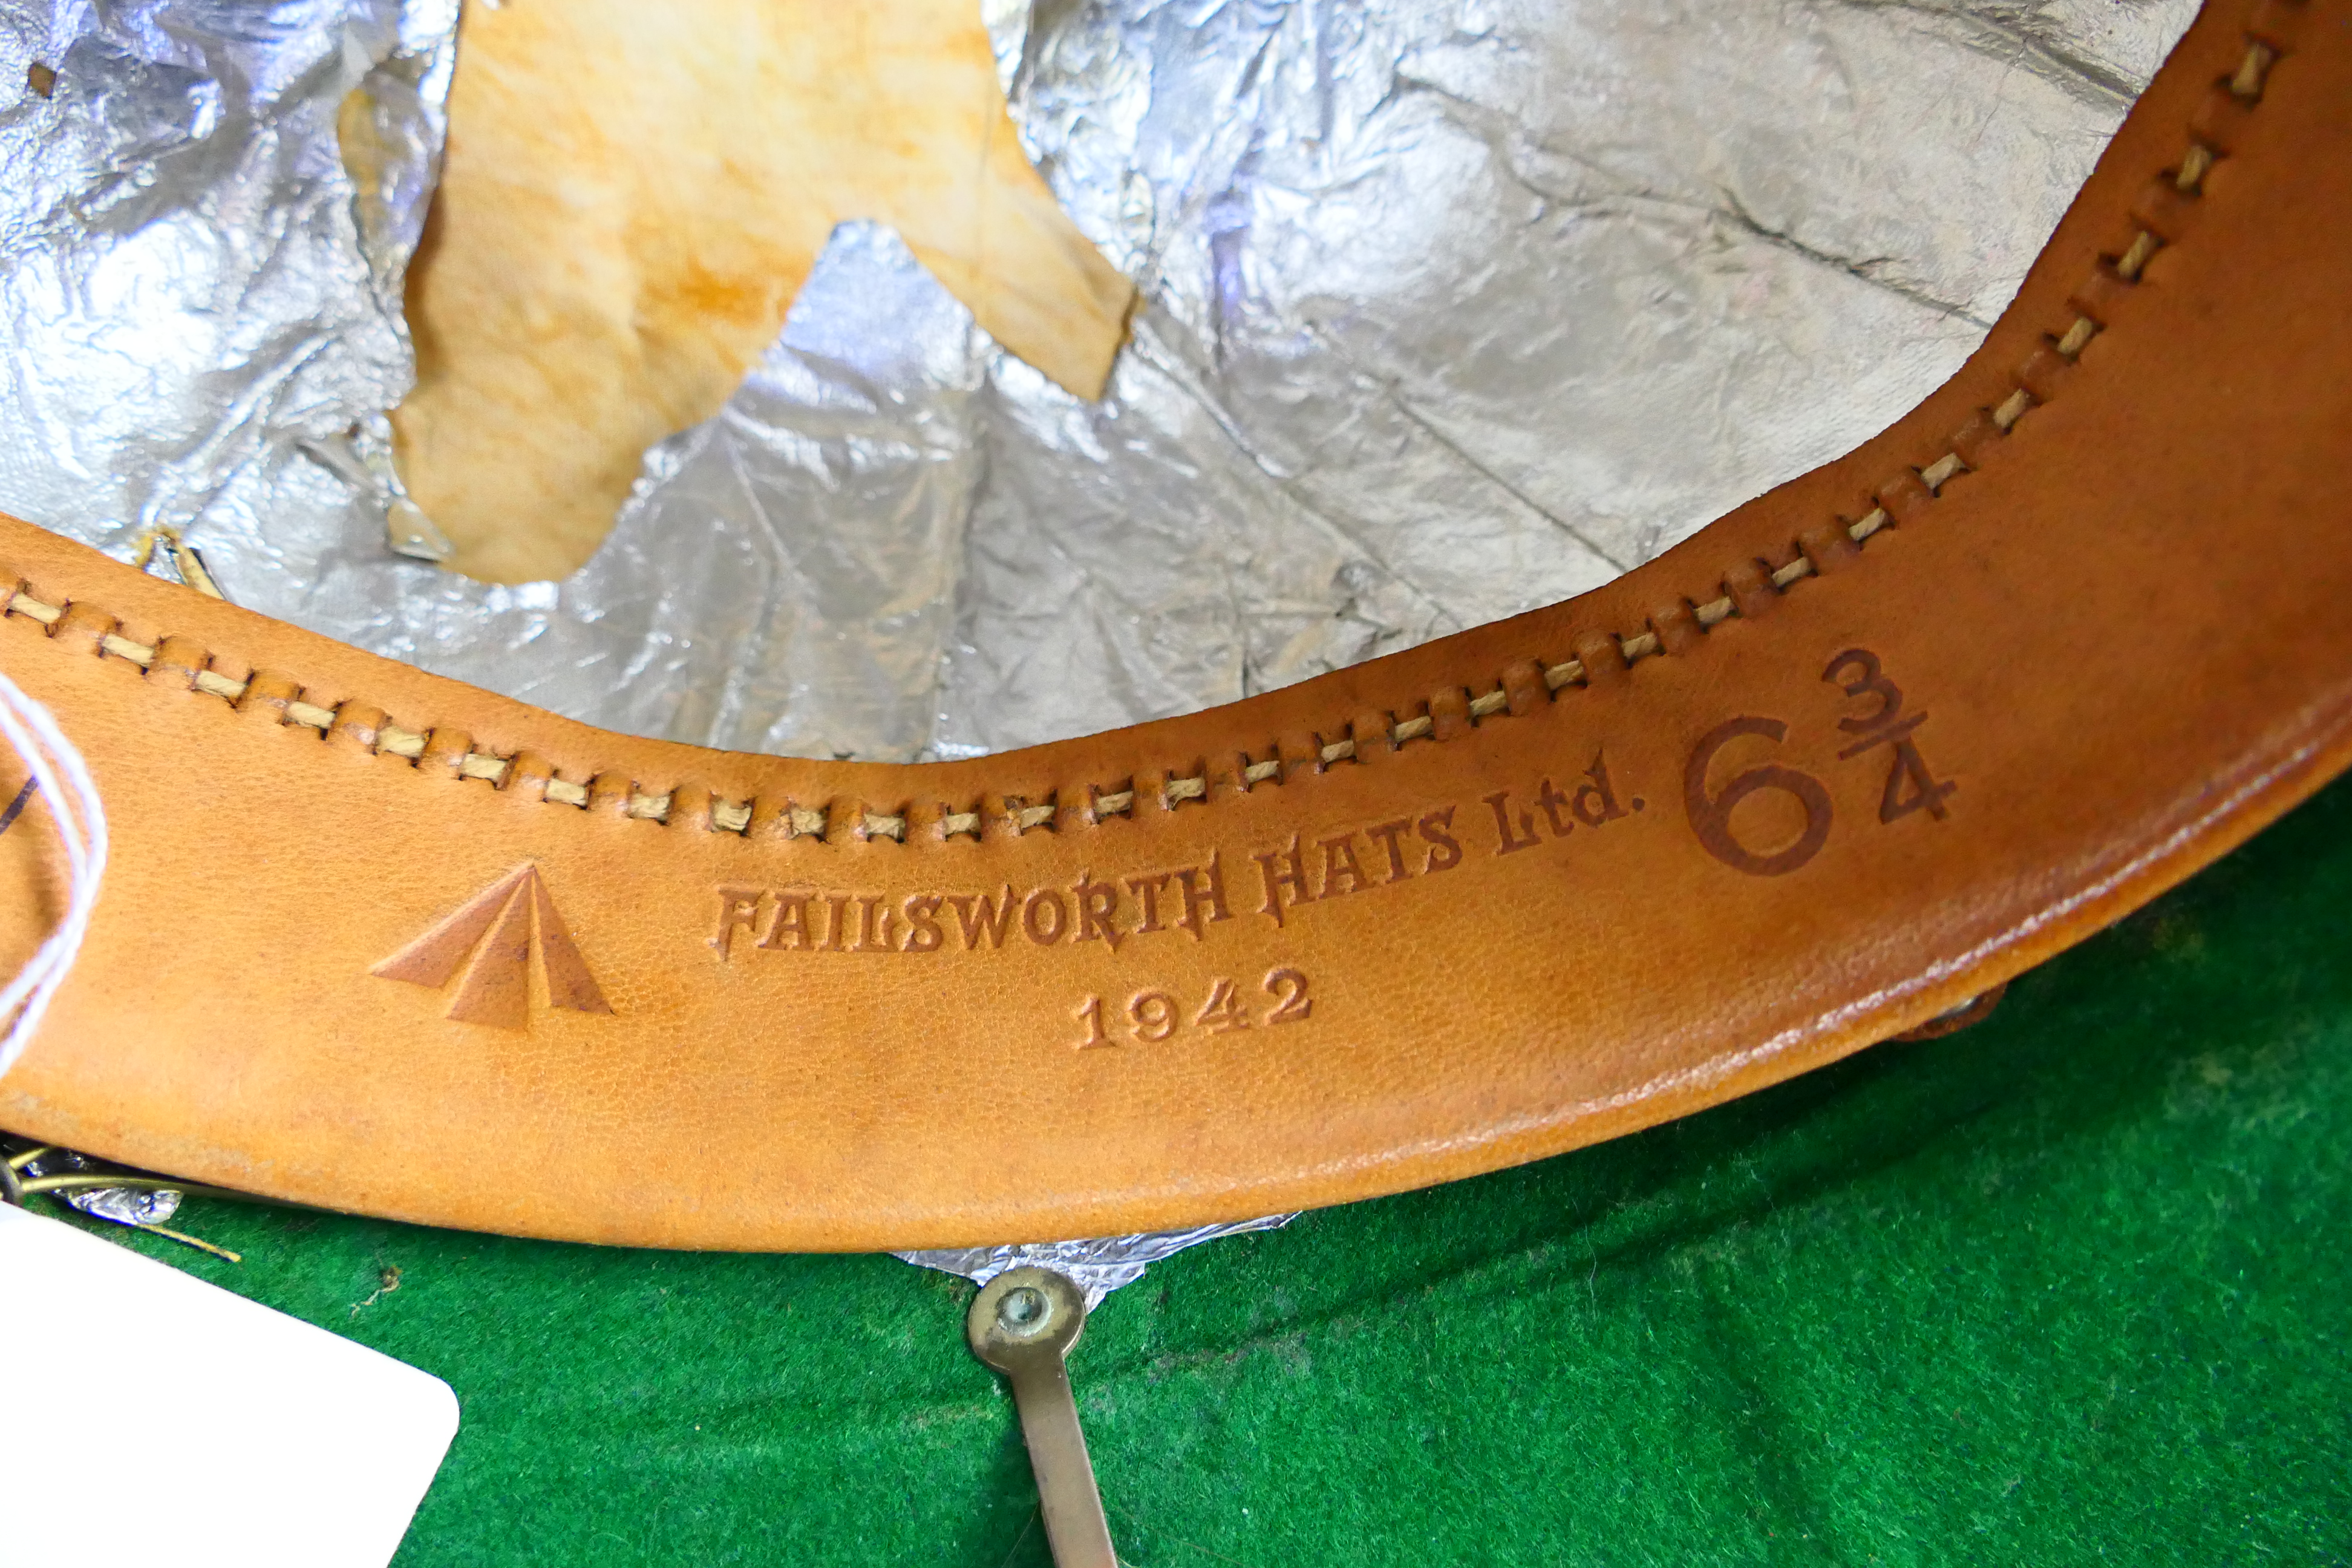 A World War Two (WWII) British Pith Helmet, dated 1942 and maker marked 'Failsworth Hats Ltd'. - Image 4 of 4